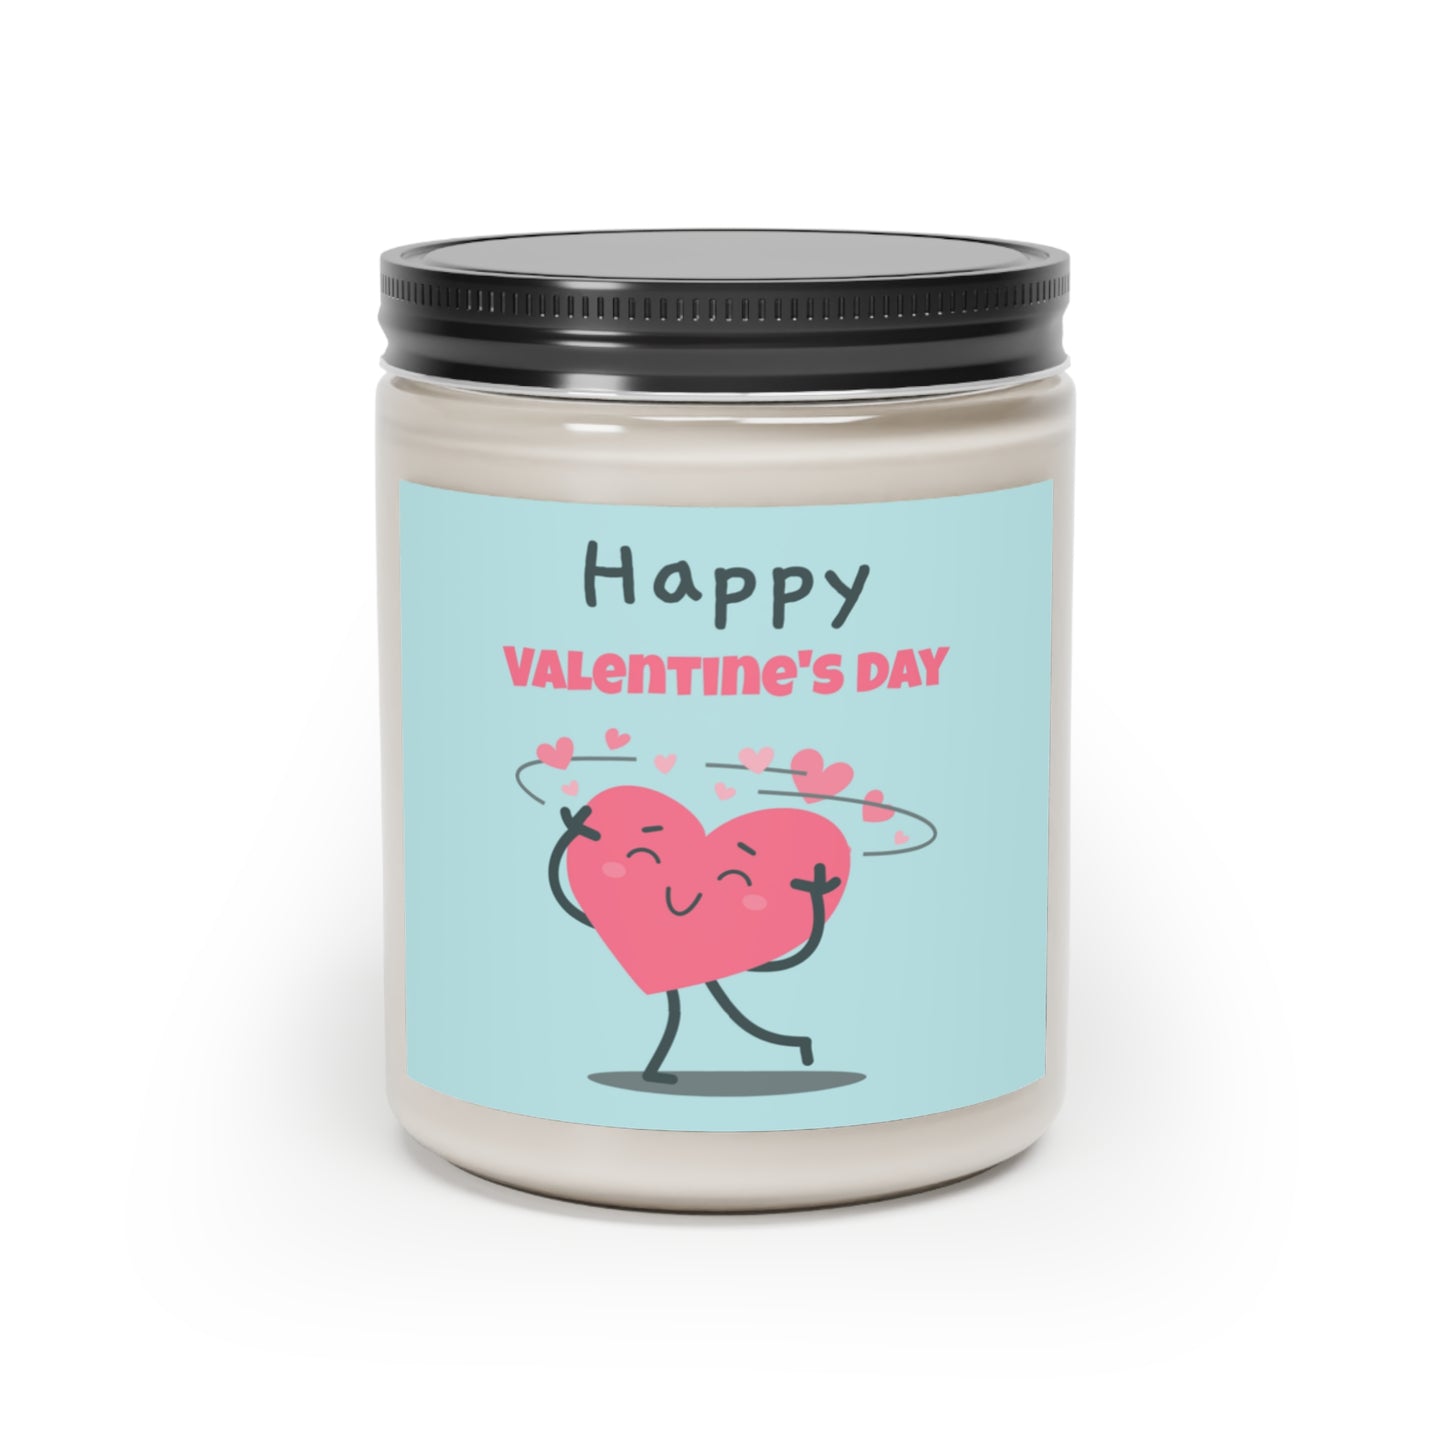 Cinnamon Valentine's-Day Candle: 9 oz.; Hand-poured Soy